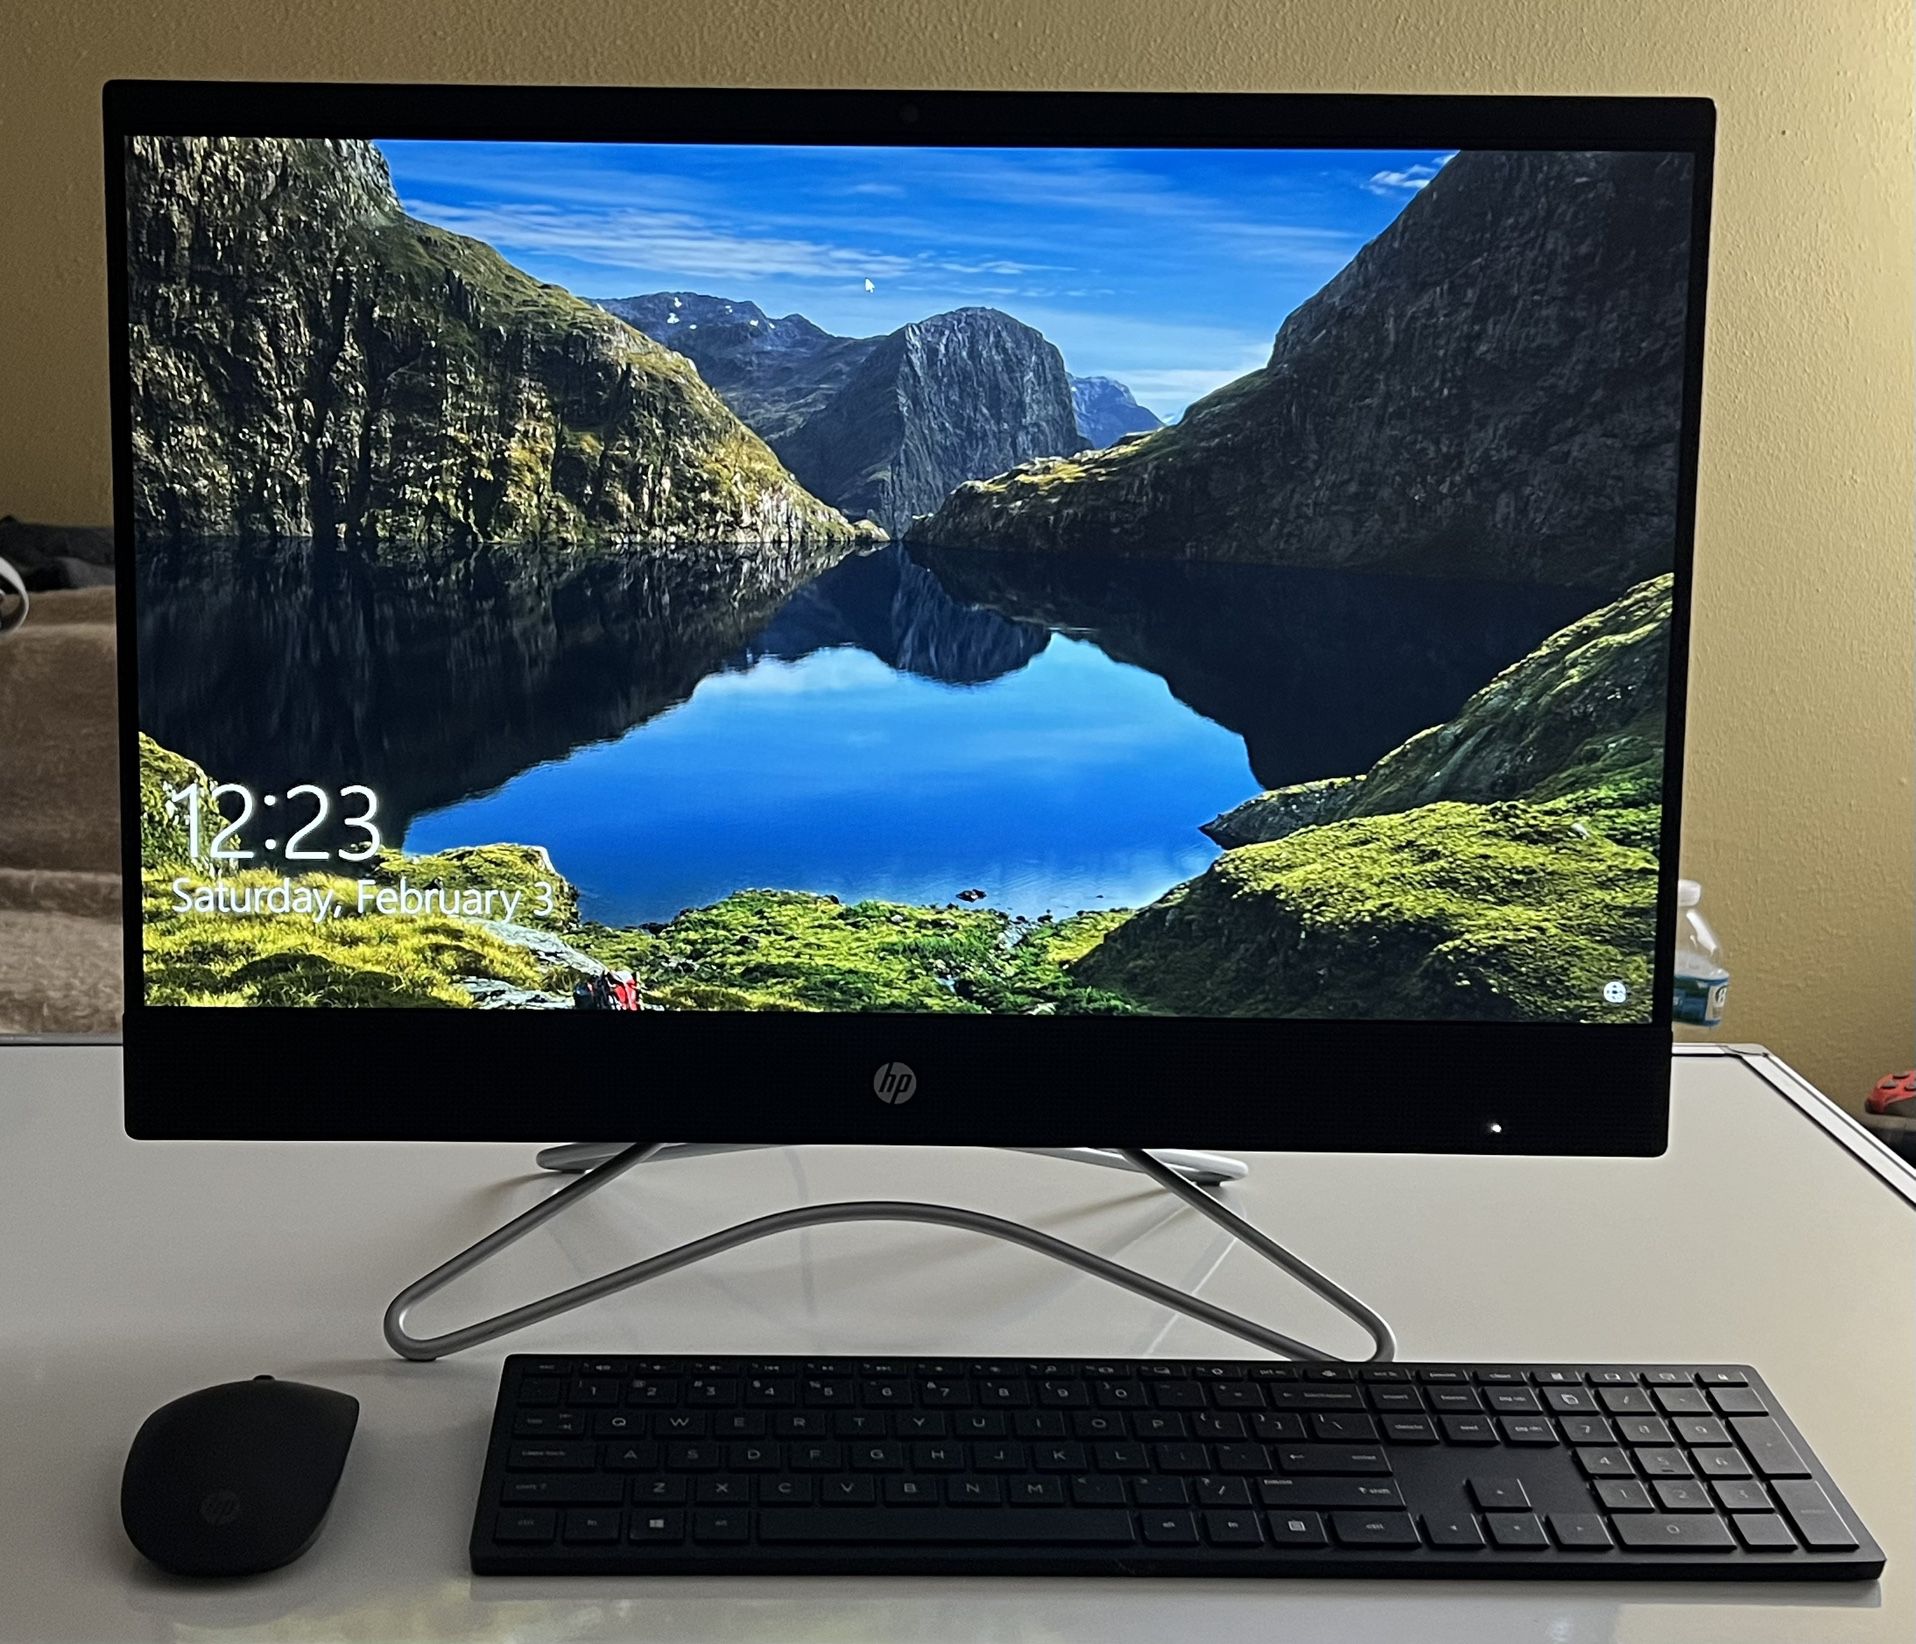 🔥 HP ALL-IN-ONE 24” Touchscreen Desktop With Wireless Keyboard And Mouse